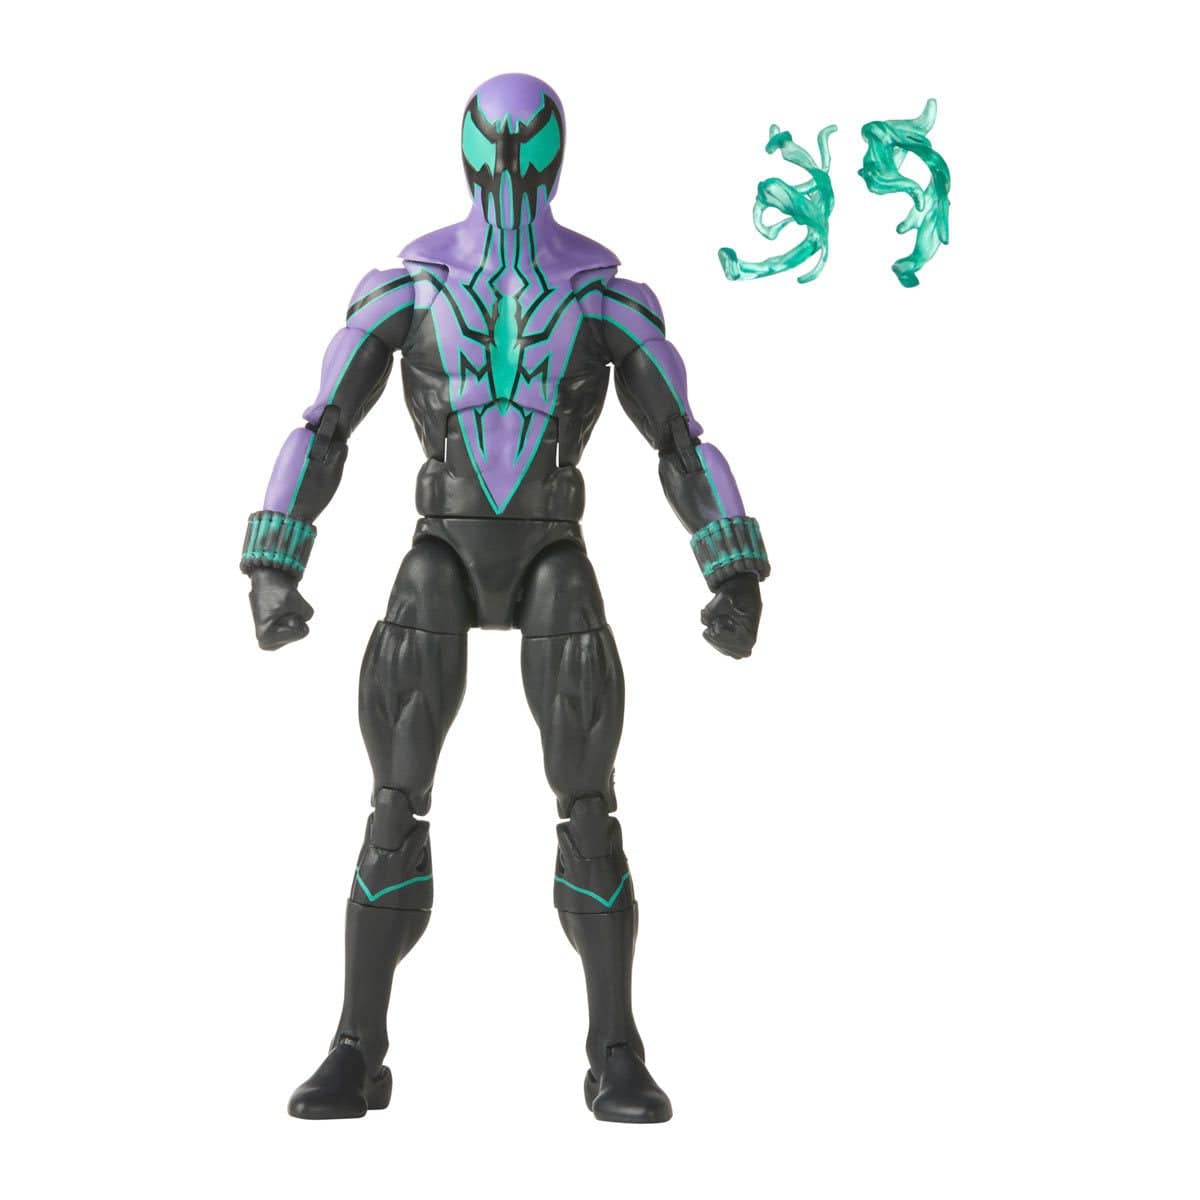 Spider-Man Retro Marvel Legends Chasm 6-Inch Action Figure With accessories 